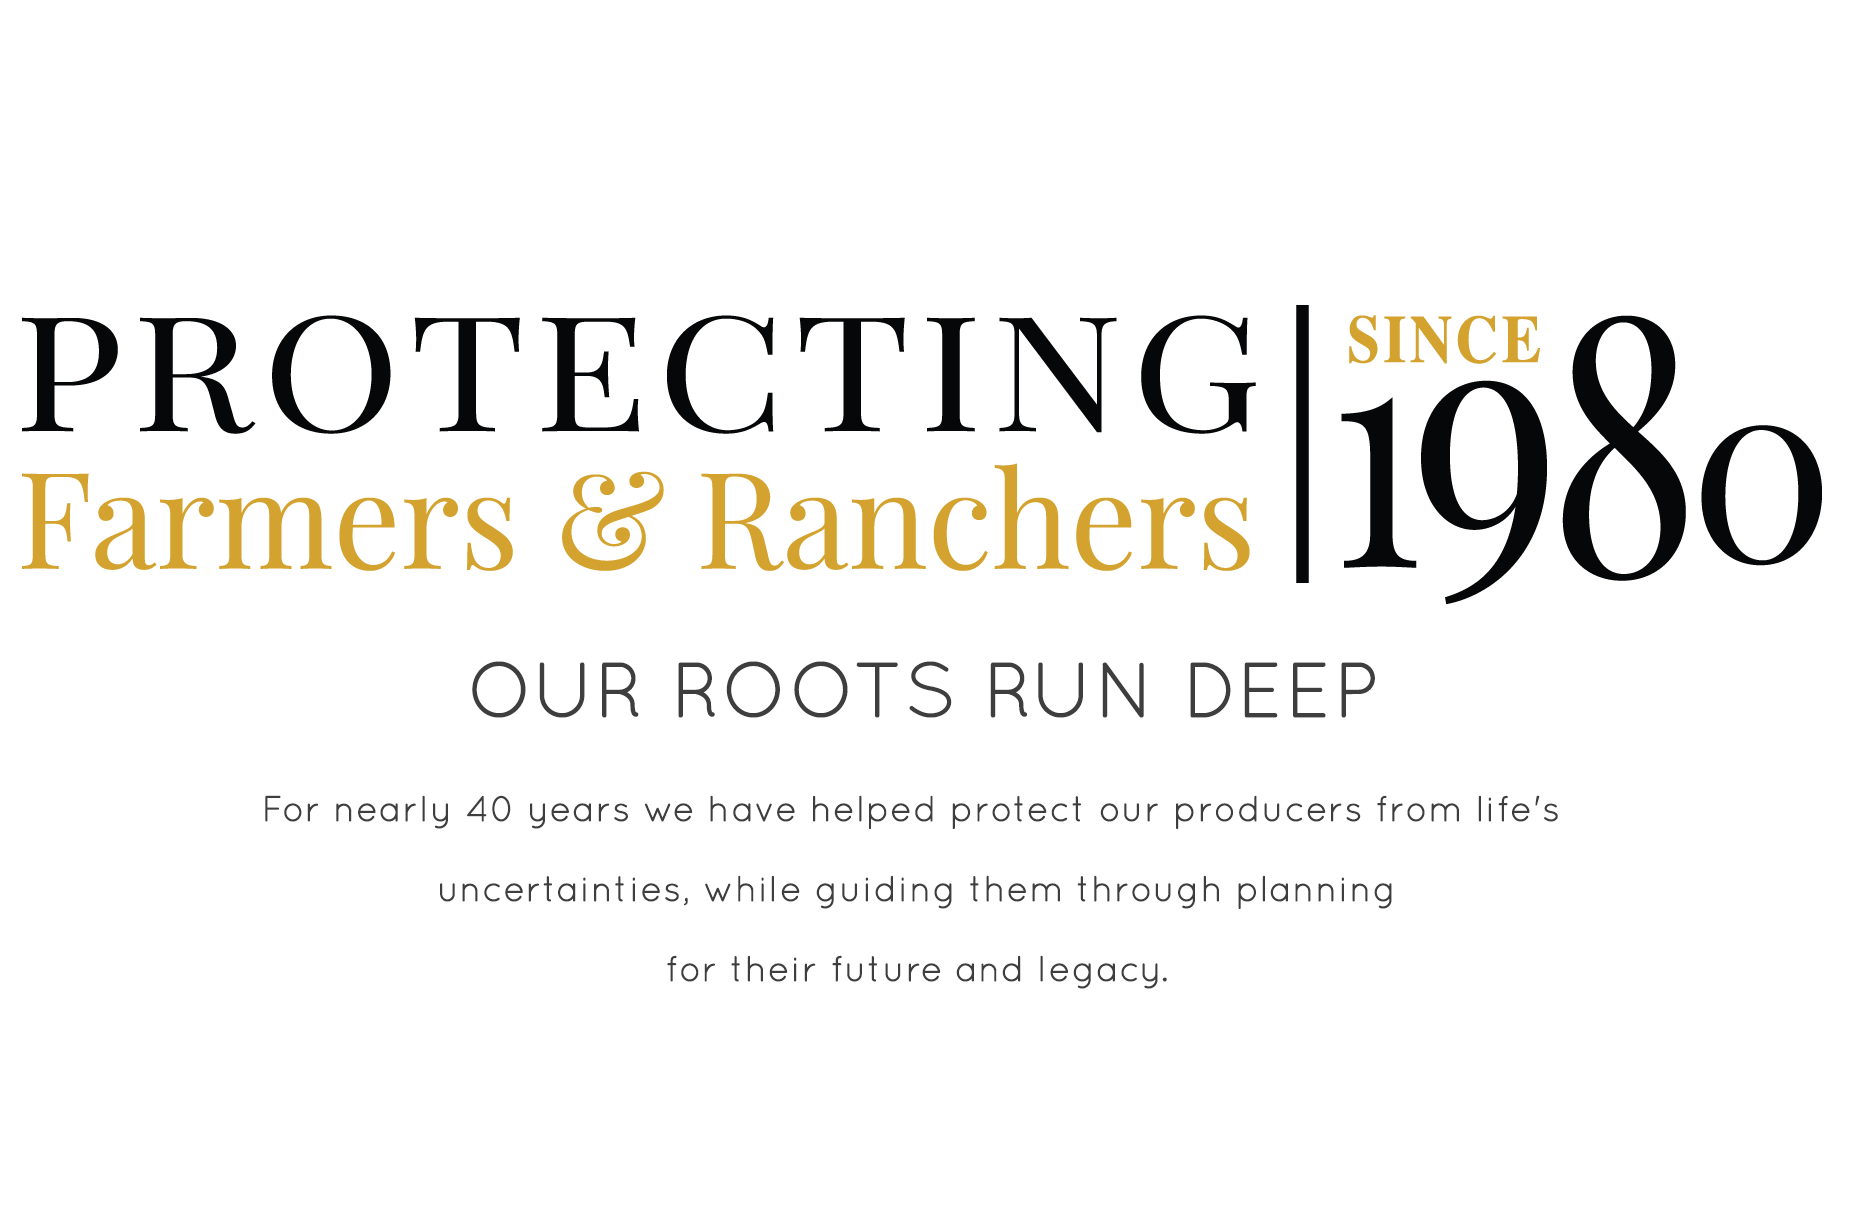 Protecting Farmers & Ranchers Since 1980: Town & Country Agribusiness